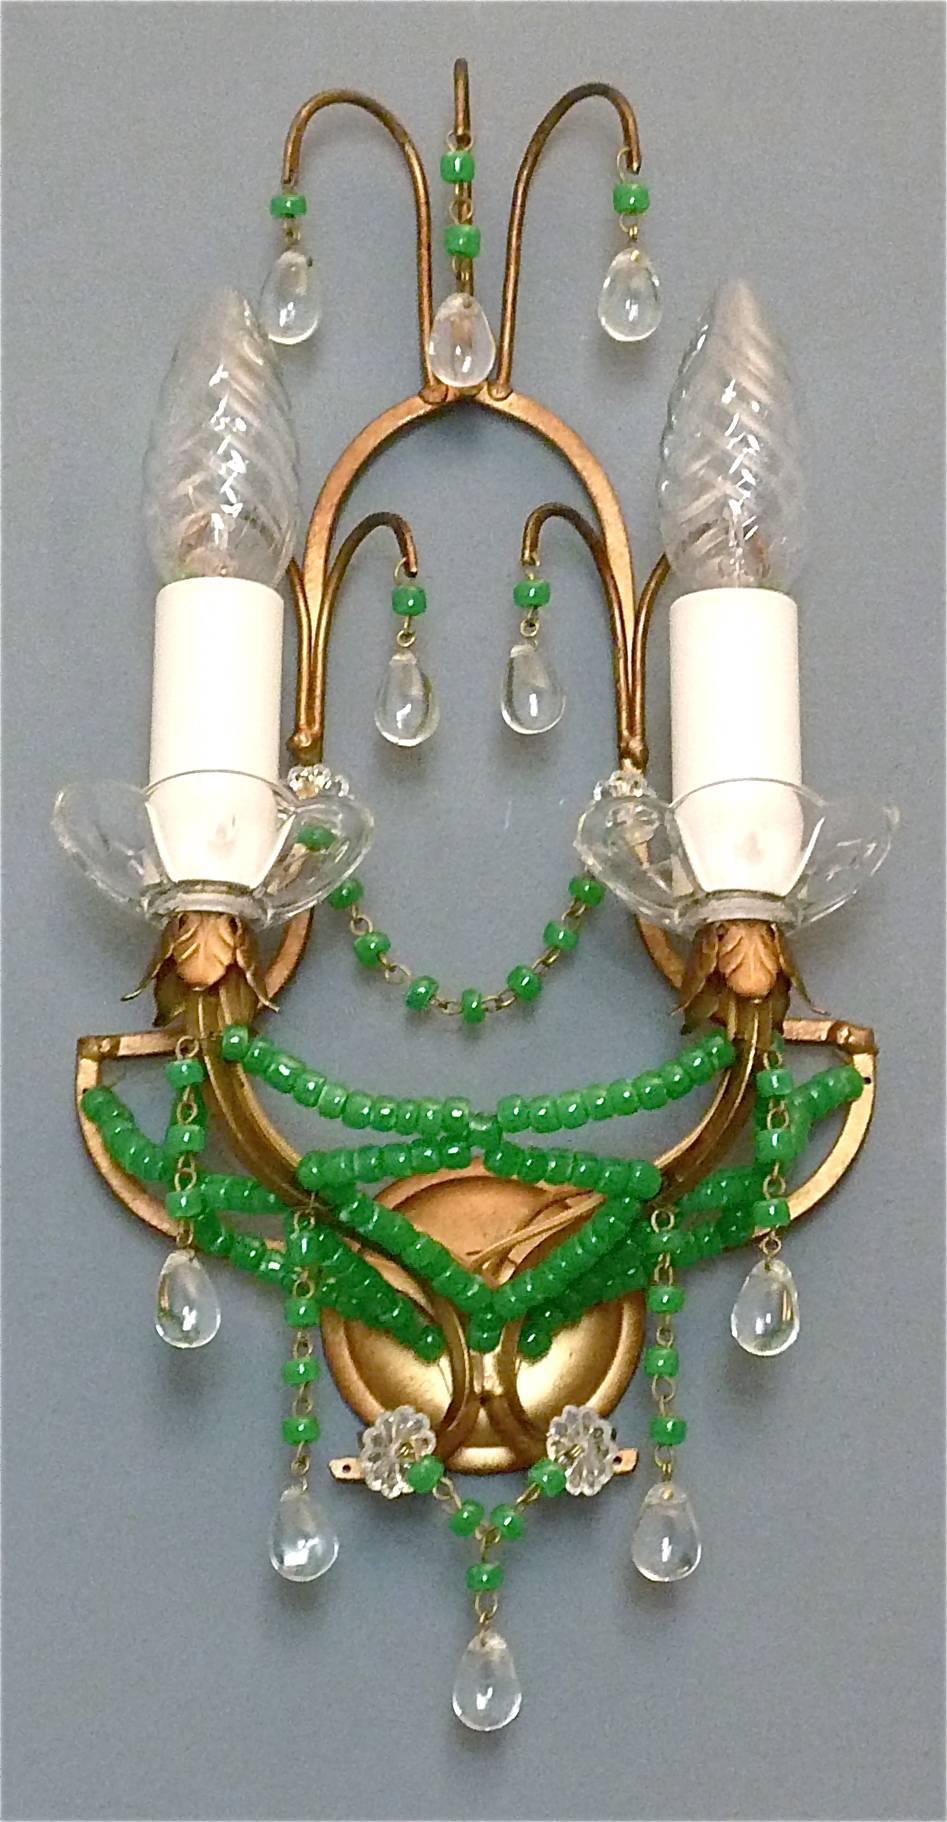 Lovely pair of Midcentury gilt metal and crystal glass wall sconces or wall lamps, Italy, circa 1970. Each wall light has jade green color Murano glass and crystal glass beads with a nice floral leaf gilt metal decoration. One sconce has a metal tag